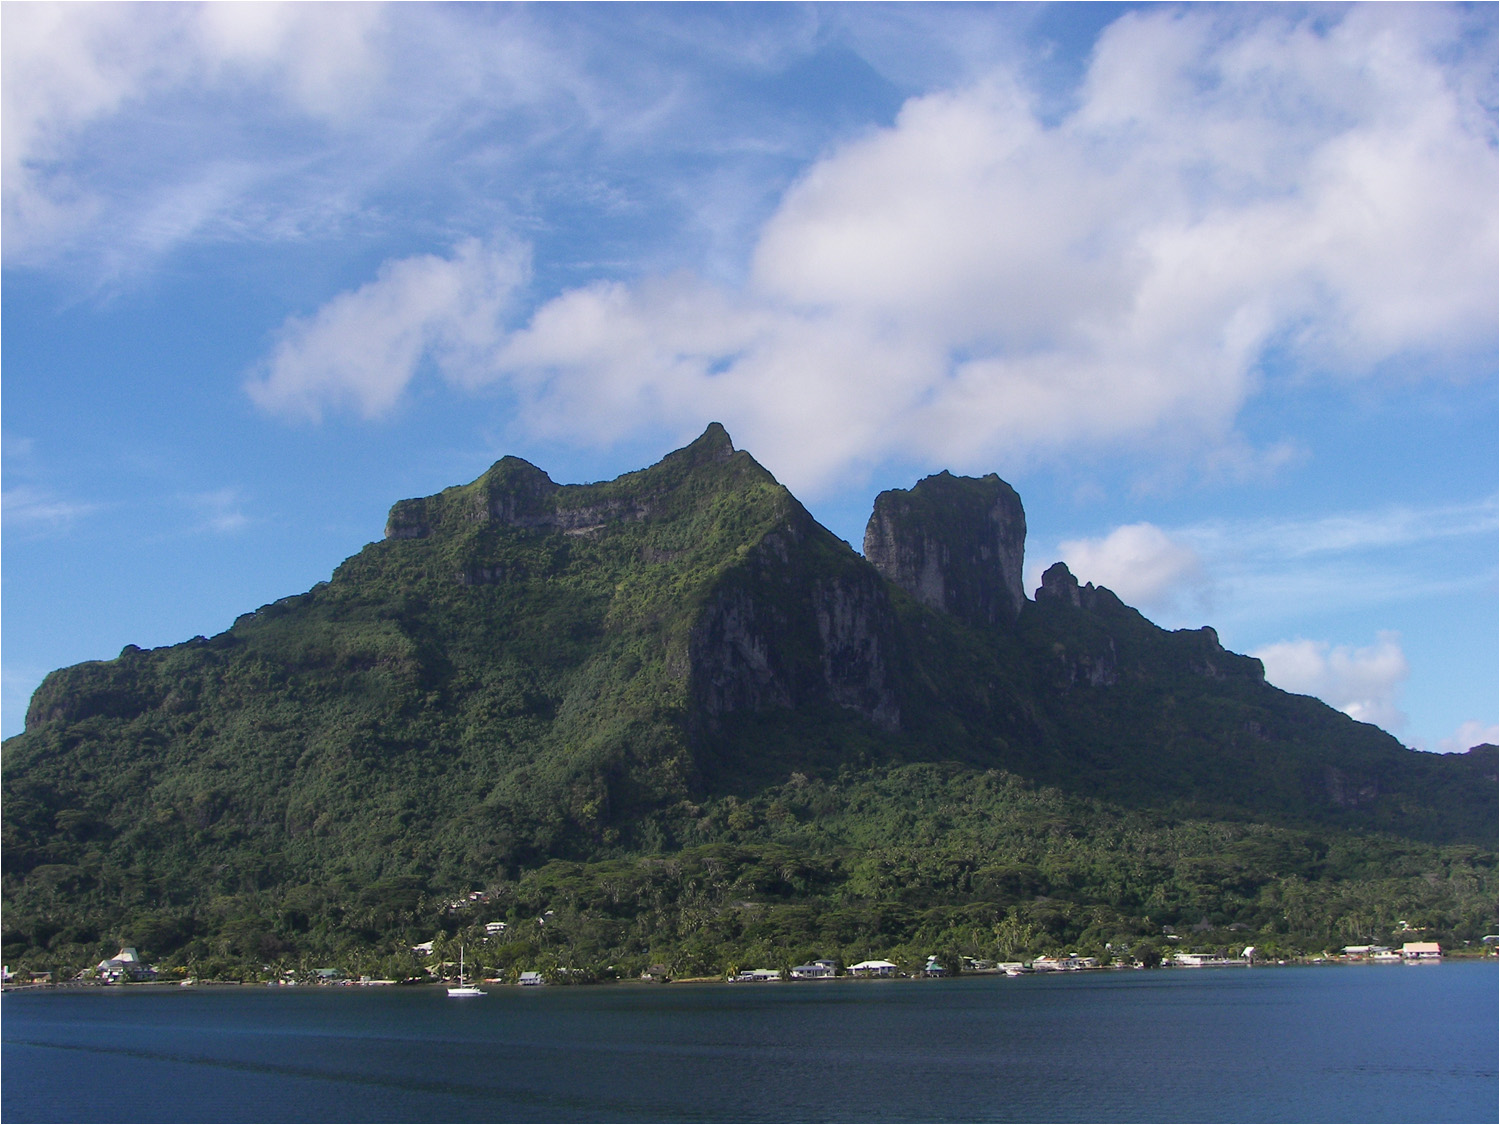 View of main peaks on Bora Bora from ship (2 of 2)